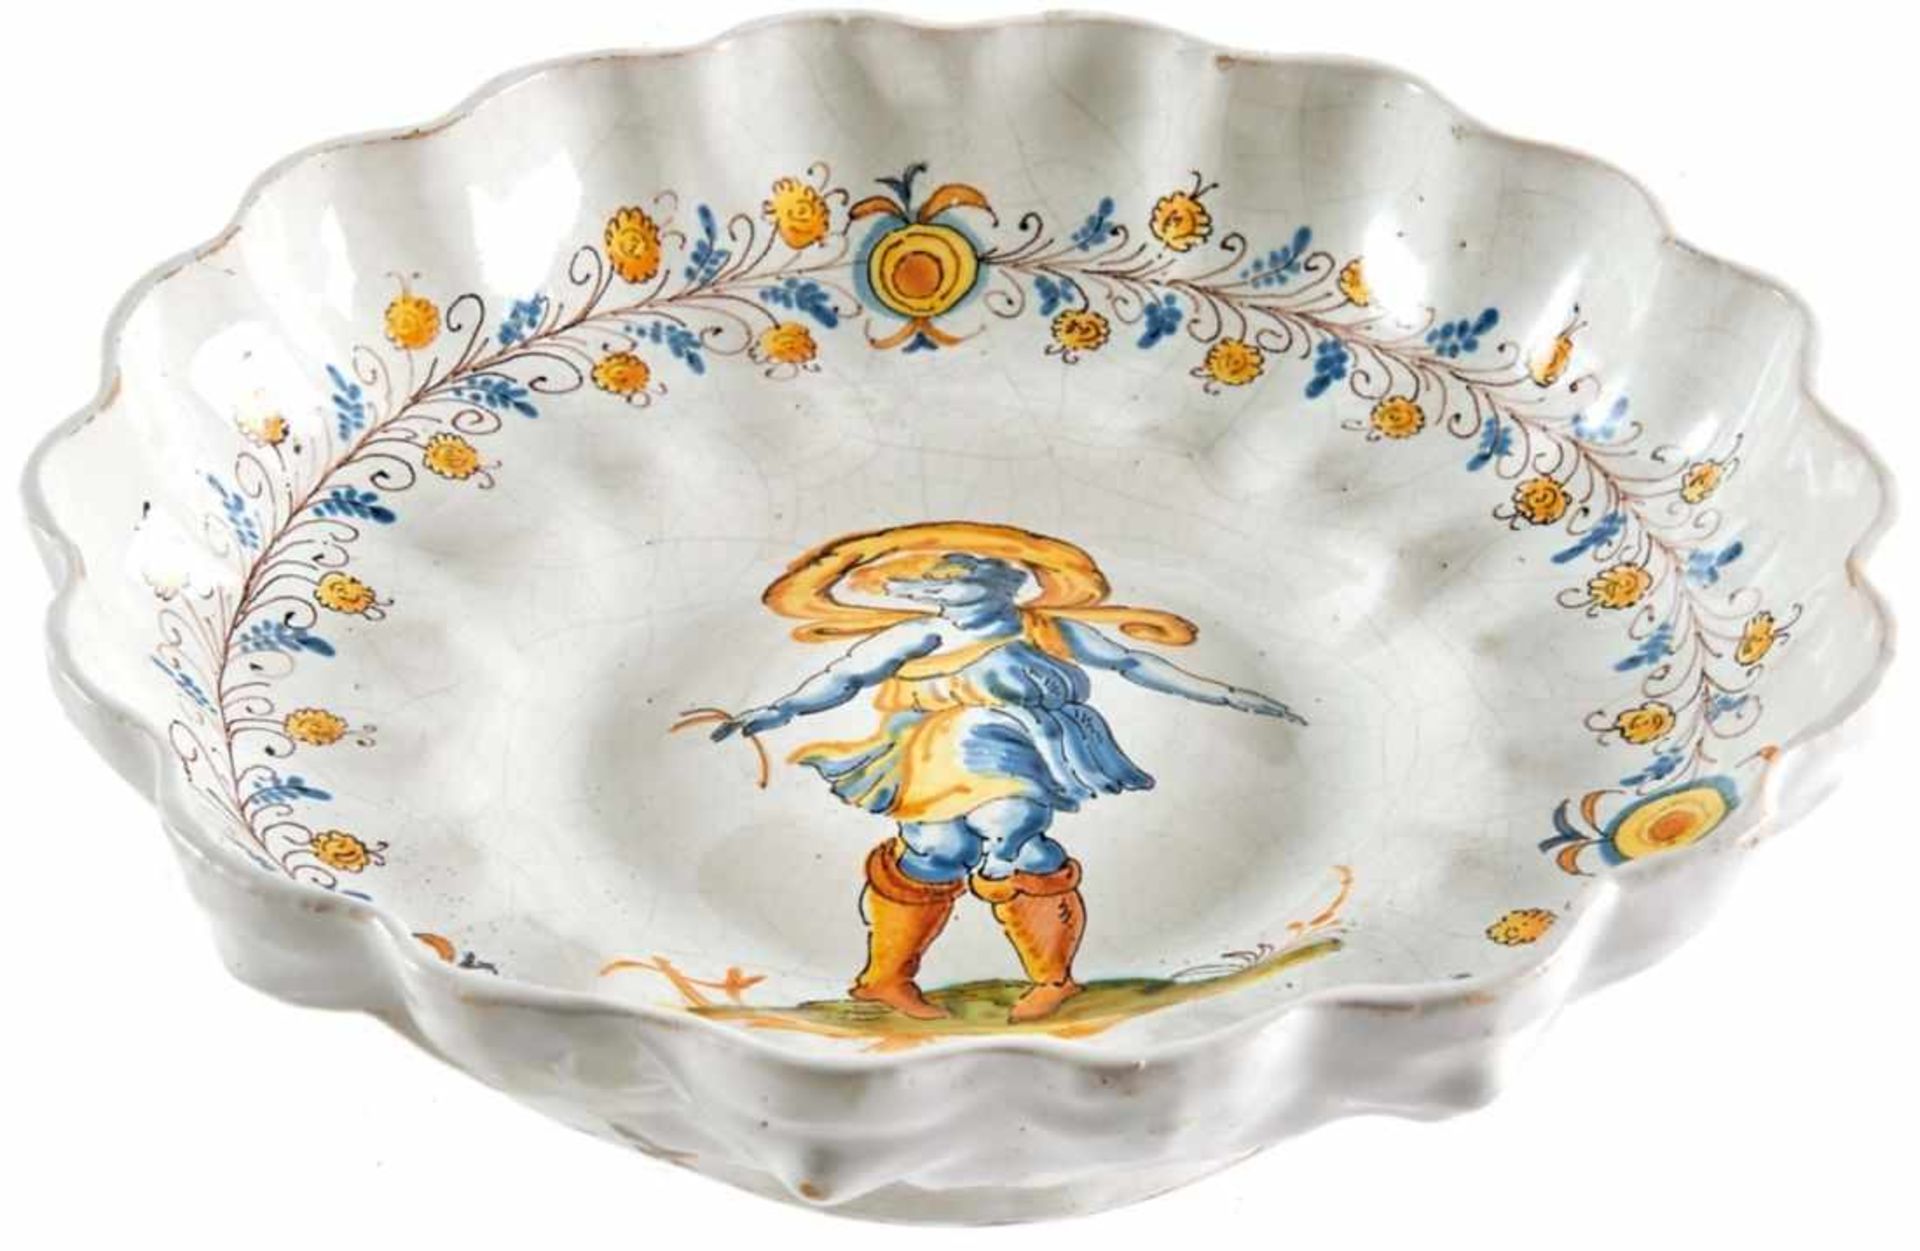 Crespina Bowl with Putto